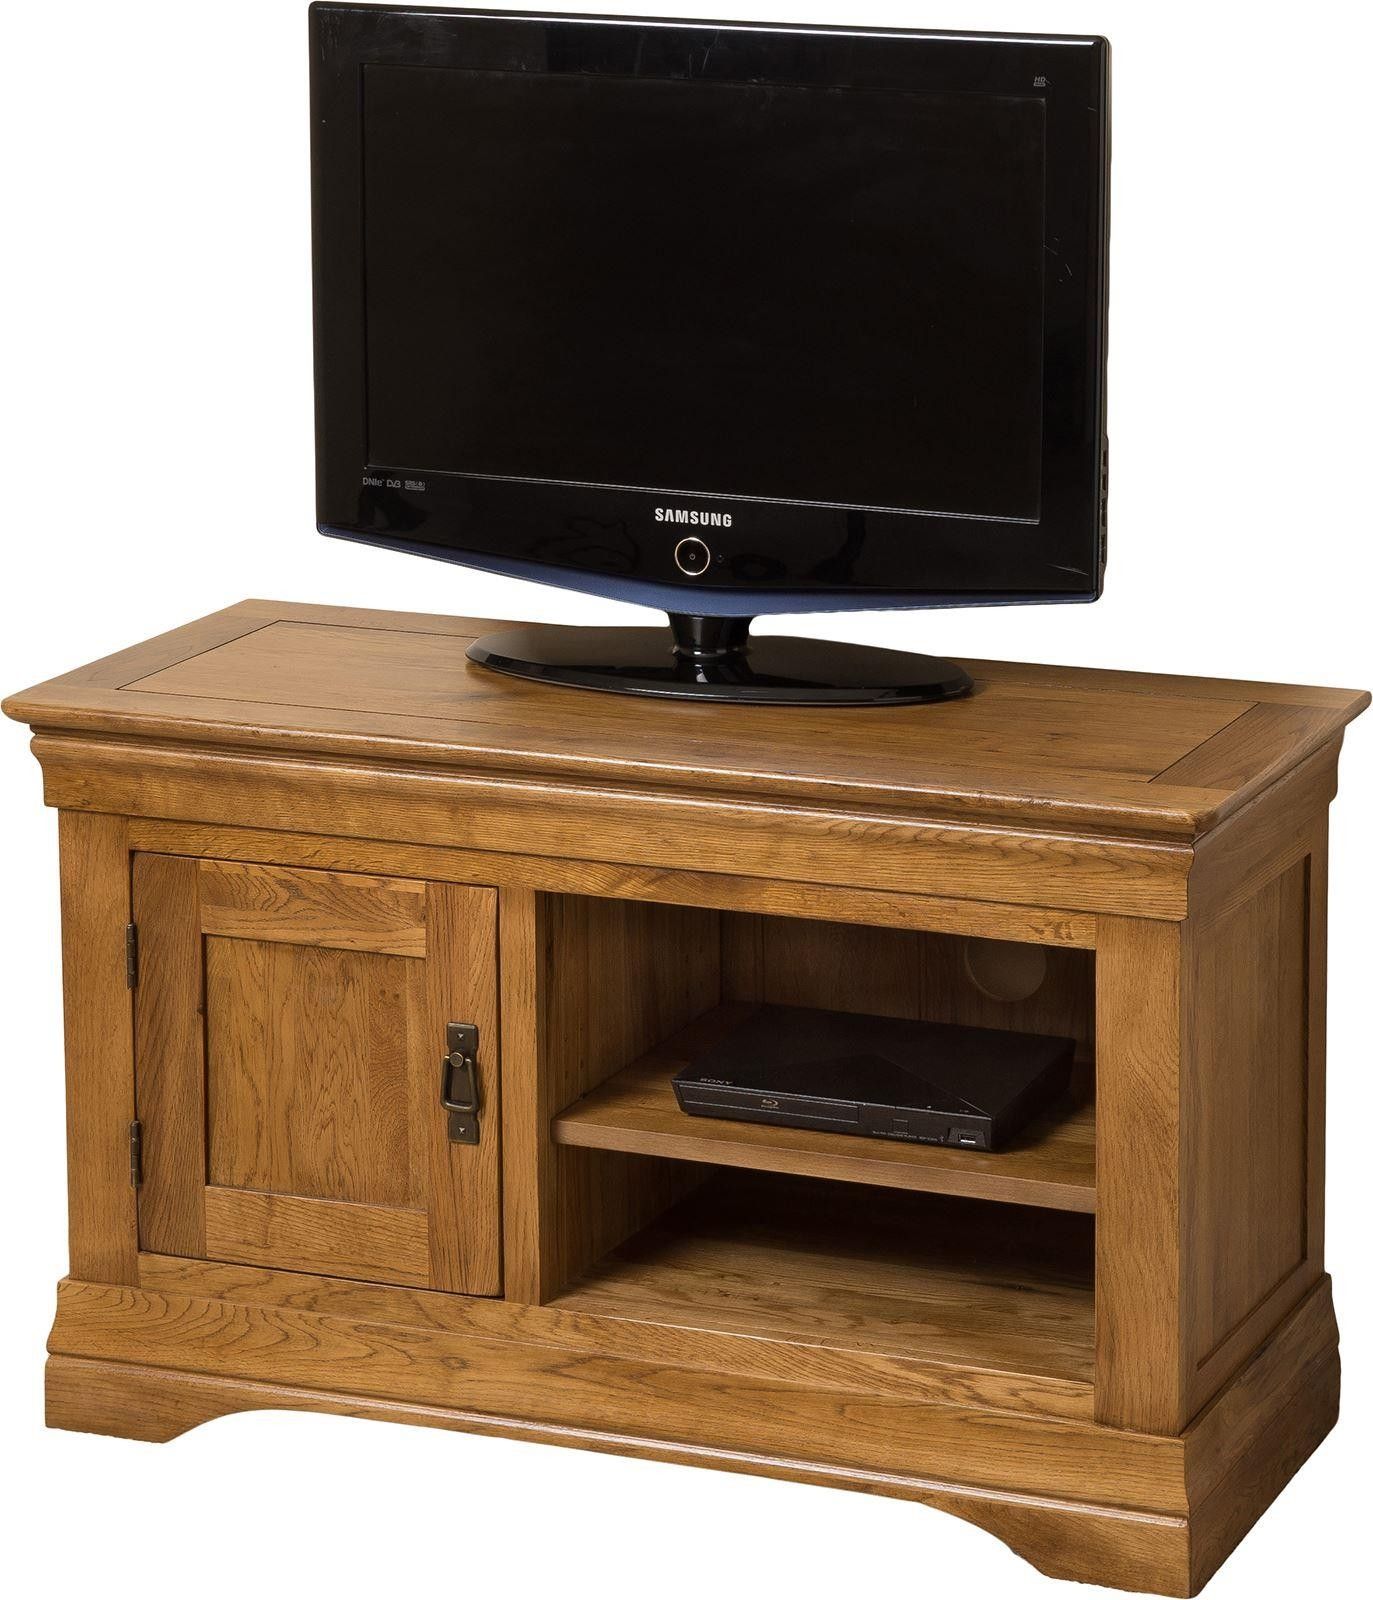 French Chateau Solid Oak Small Tv Cabinet | Modern Intended For Small Oak Tv Cabinets (View 1 of 15)